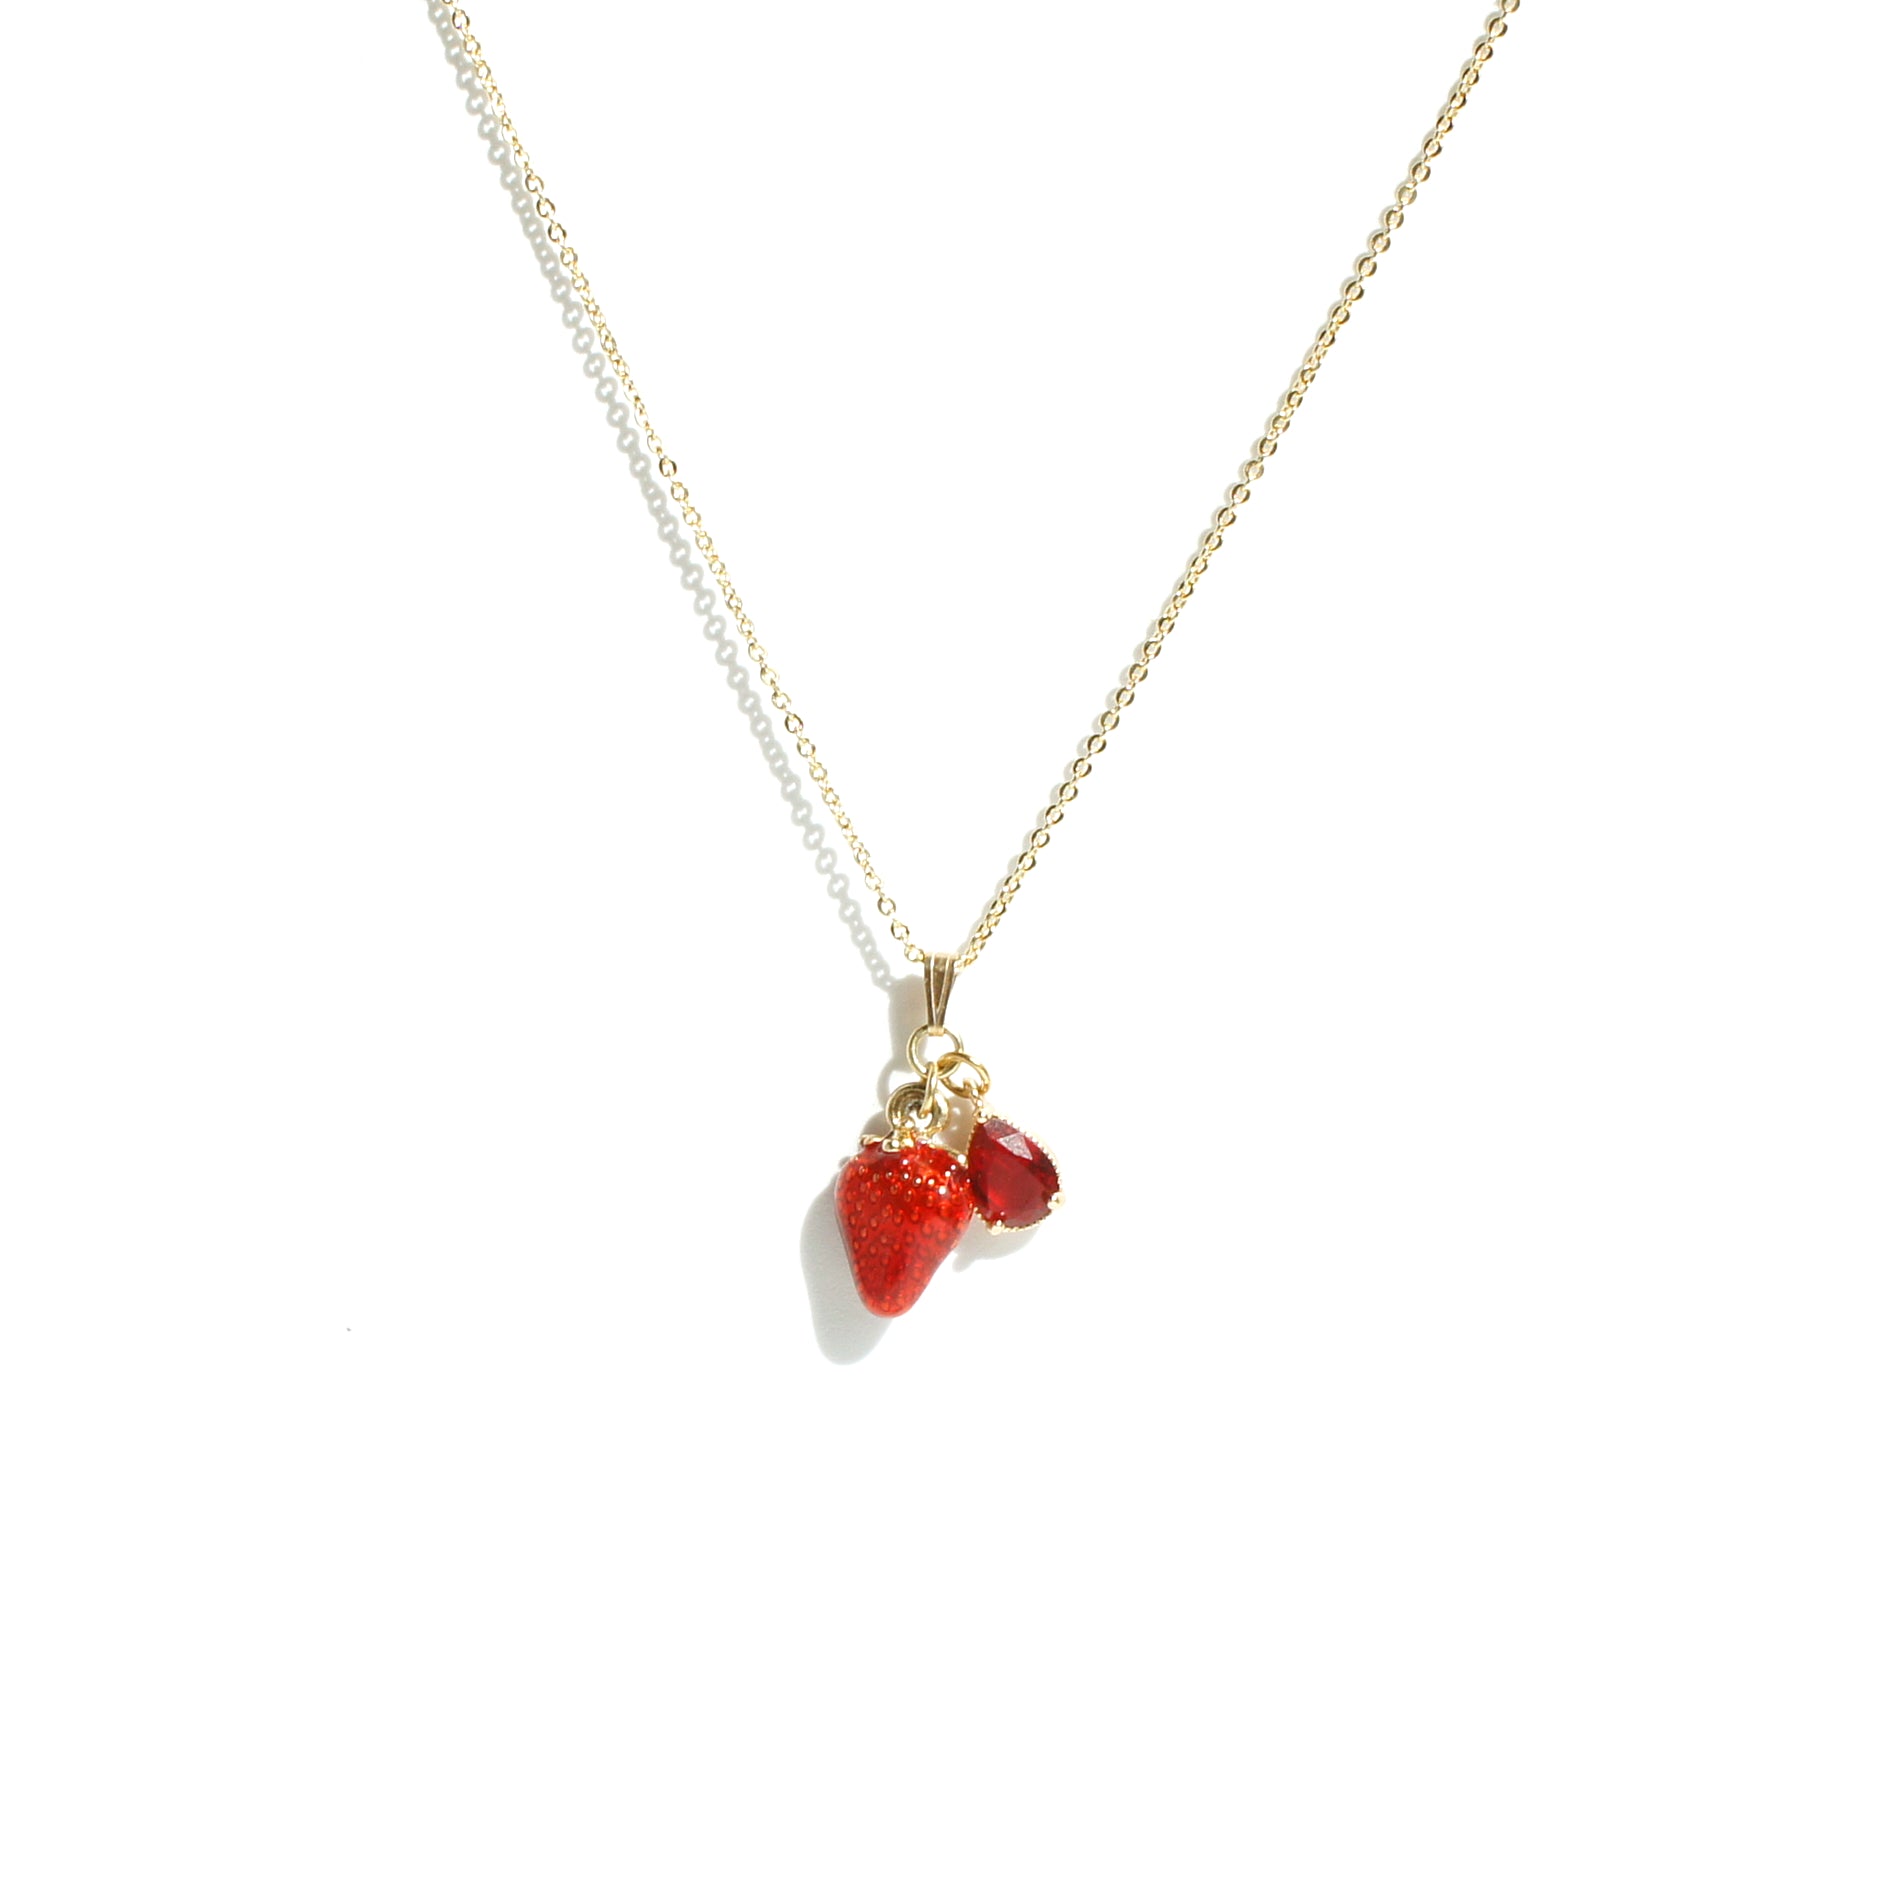 Fruity Chain Necklace with Enamel and Crystal Pendant, Lemon/Strawberry